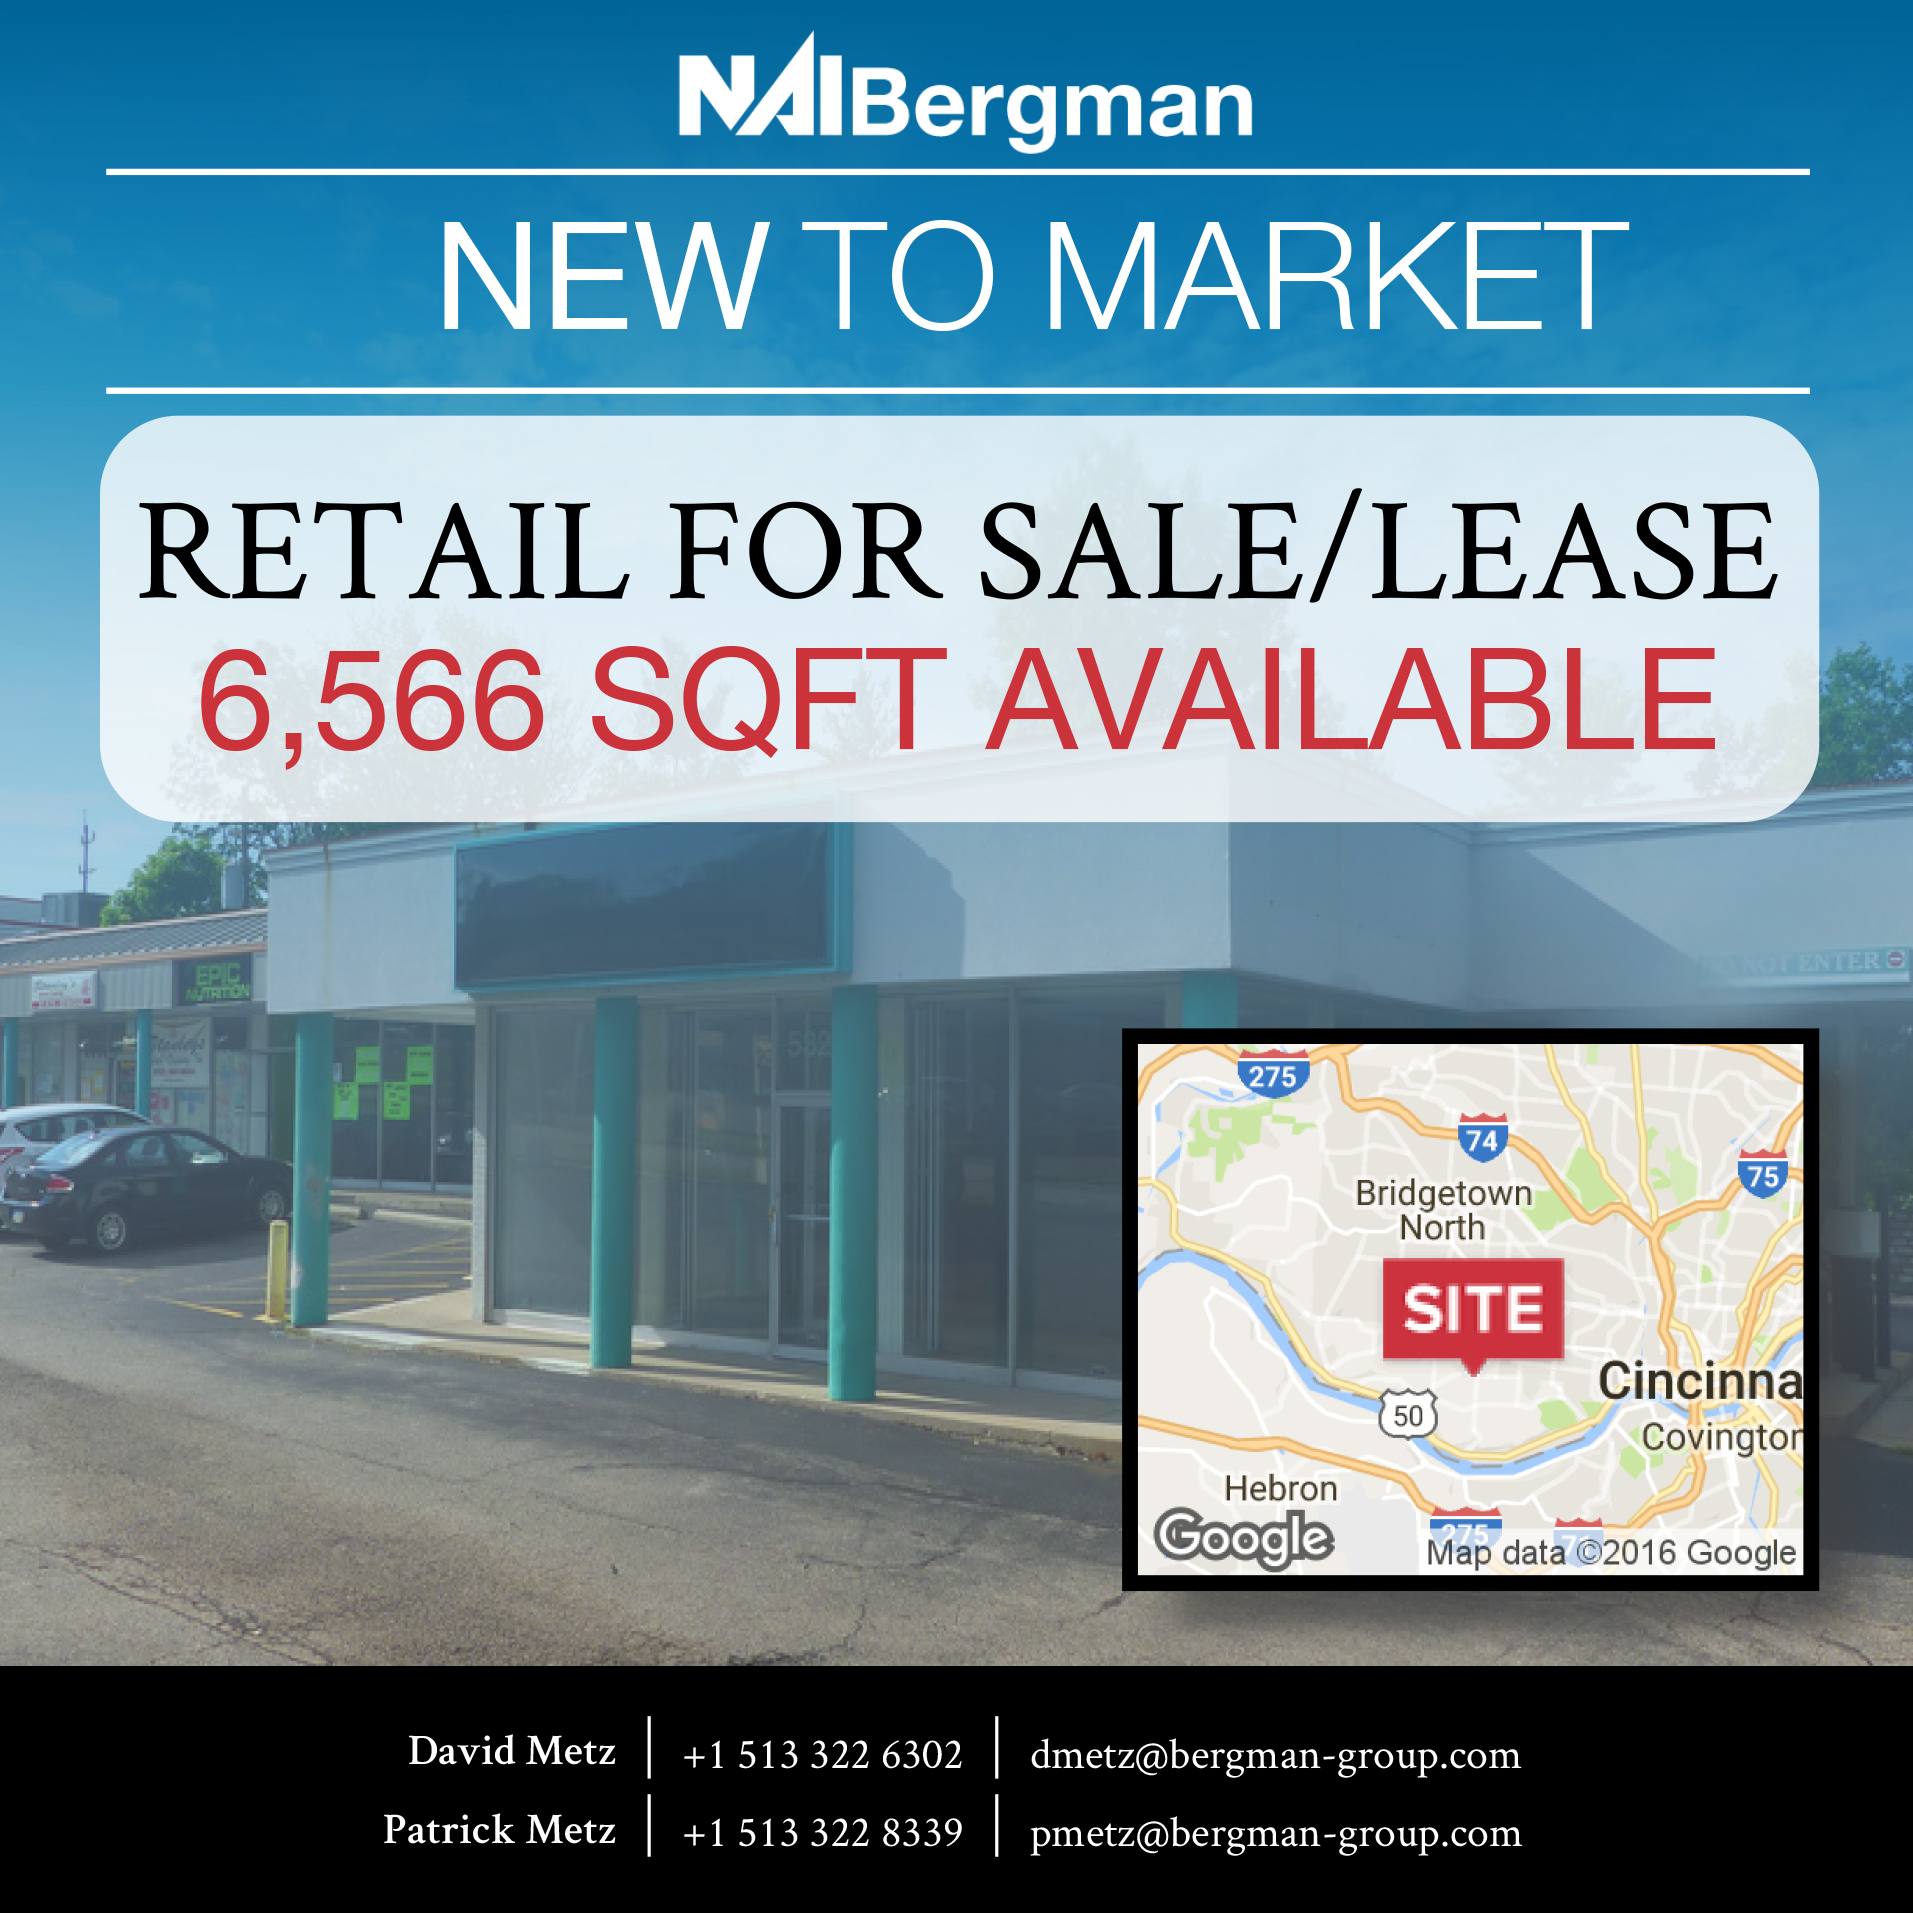 Foley Rd, New to market, Commercial Real Estate, CRE, NAI Bergman, Retail for Sale, Retail for Lease, Retail, Lease, Sale